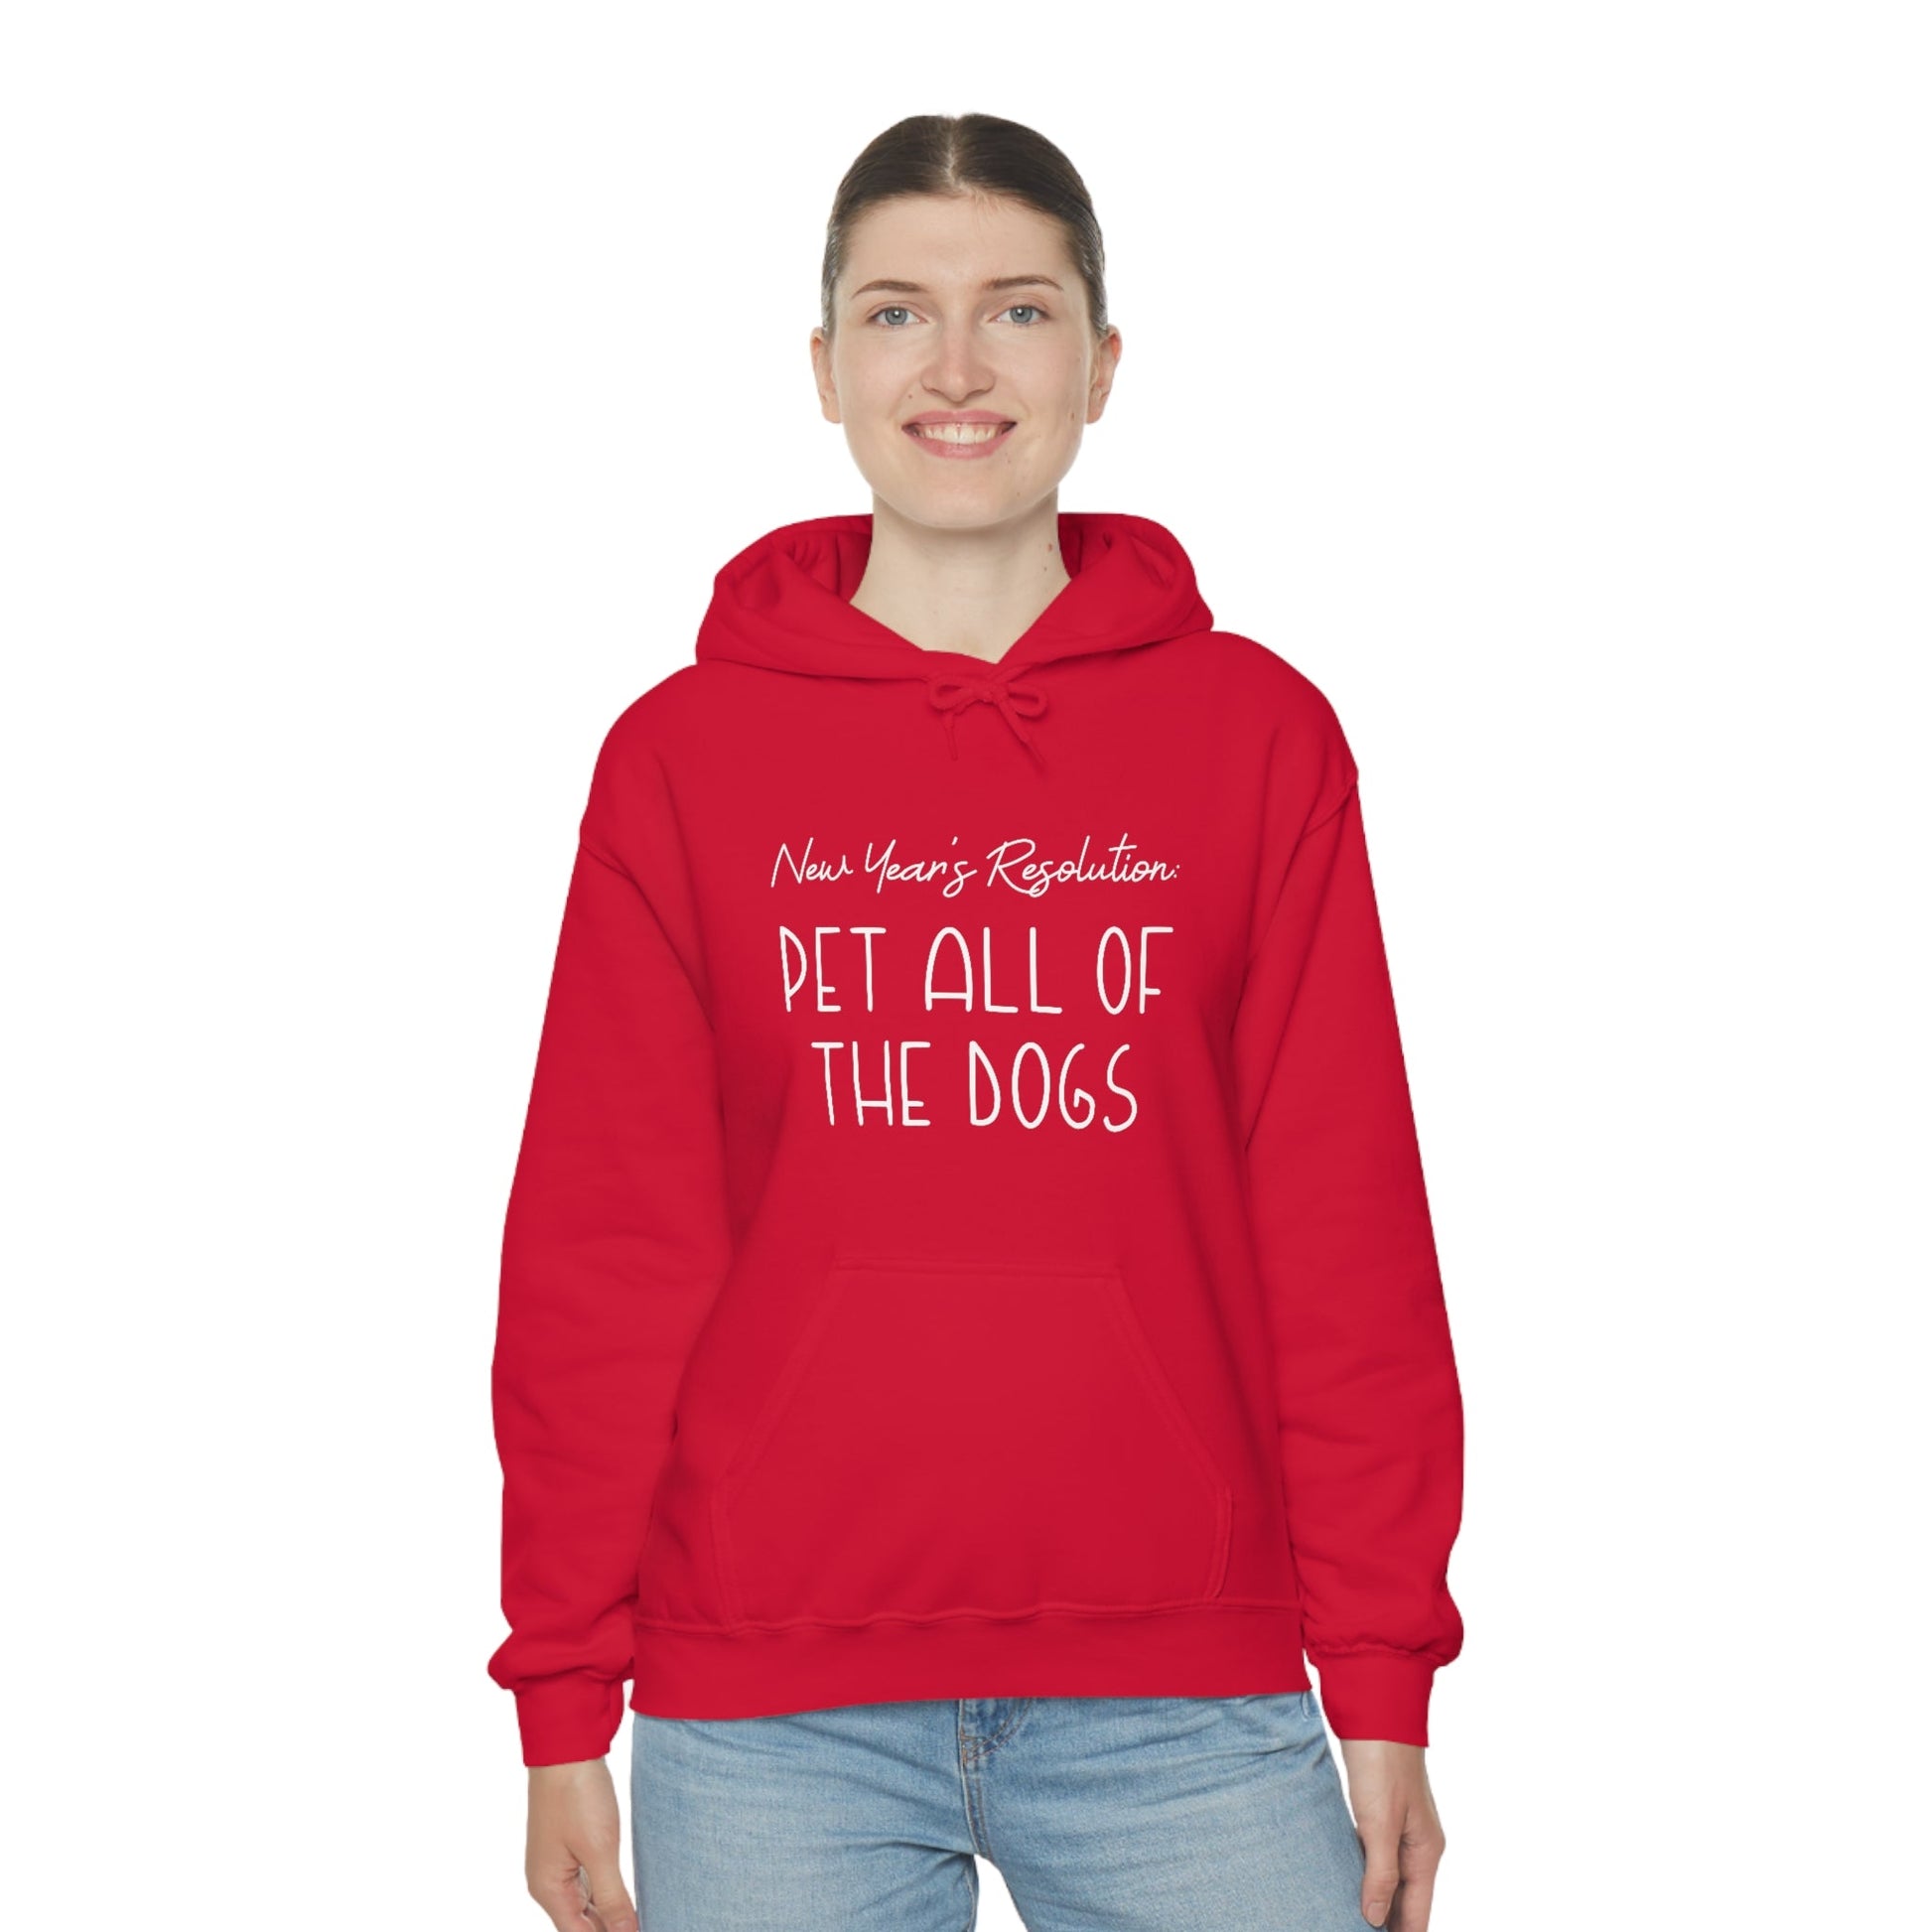 New Year's Resolution: Pet All Of The Dogs | Hooded Sweatshirt - Detezi Designs-30213608789639364819